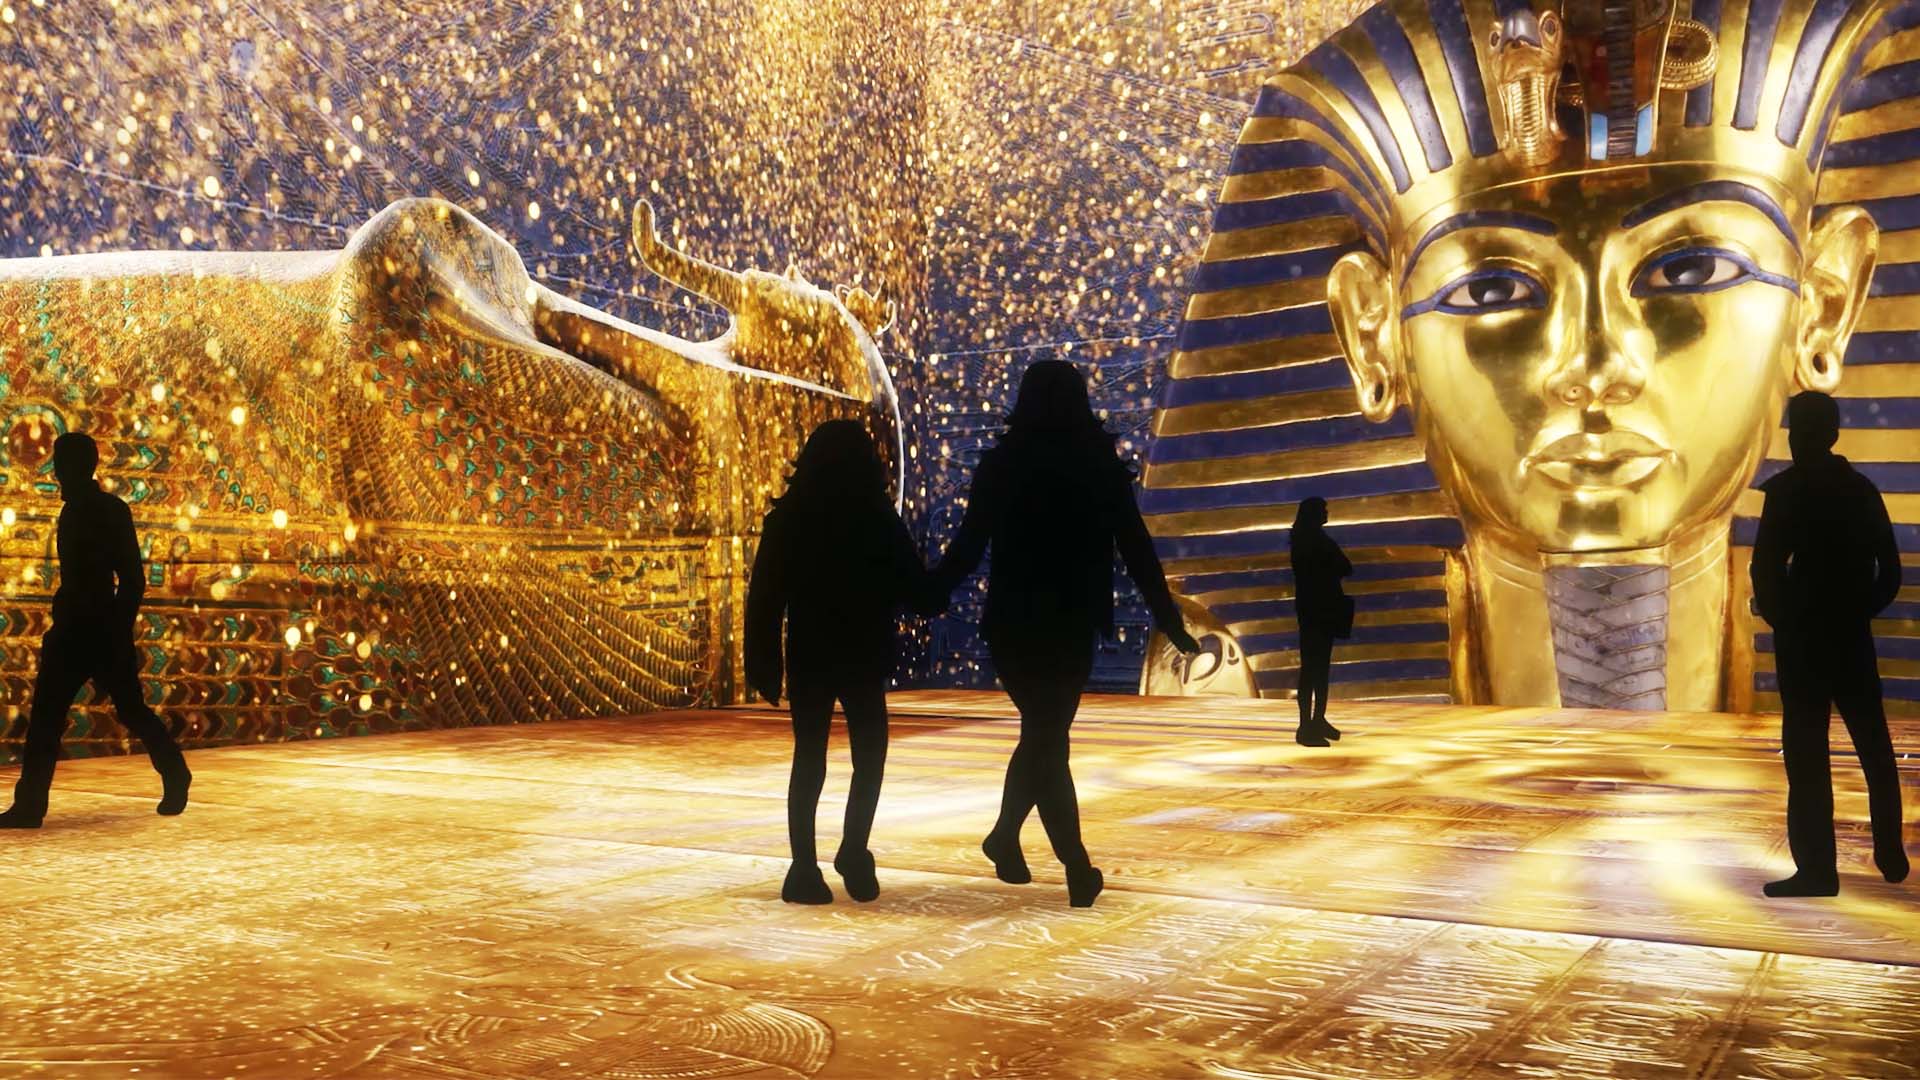 King Tut's Mask and Coffins against a luminous background envelops the visitor: Beyond KingTut